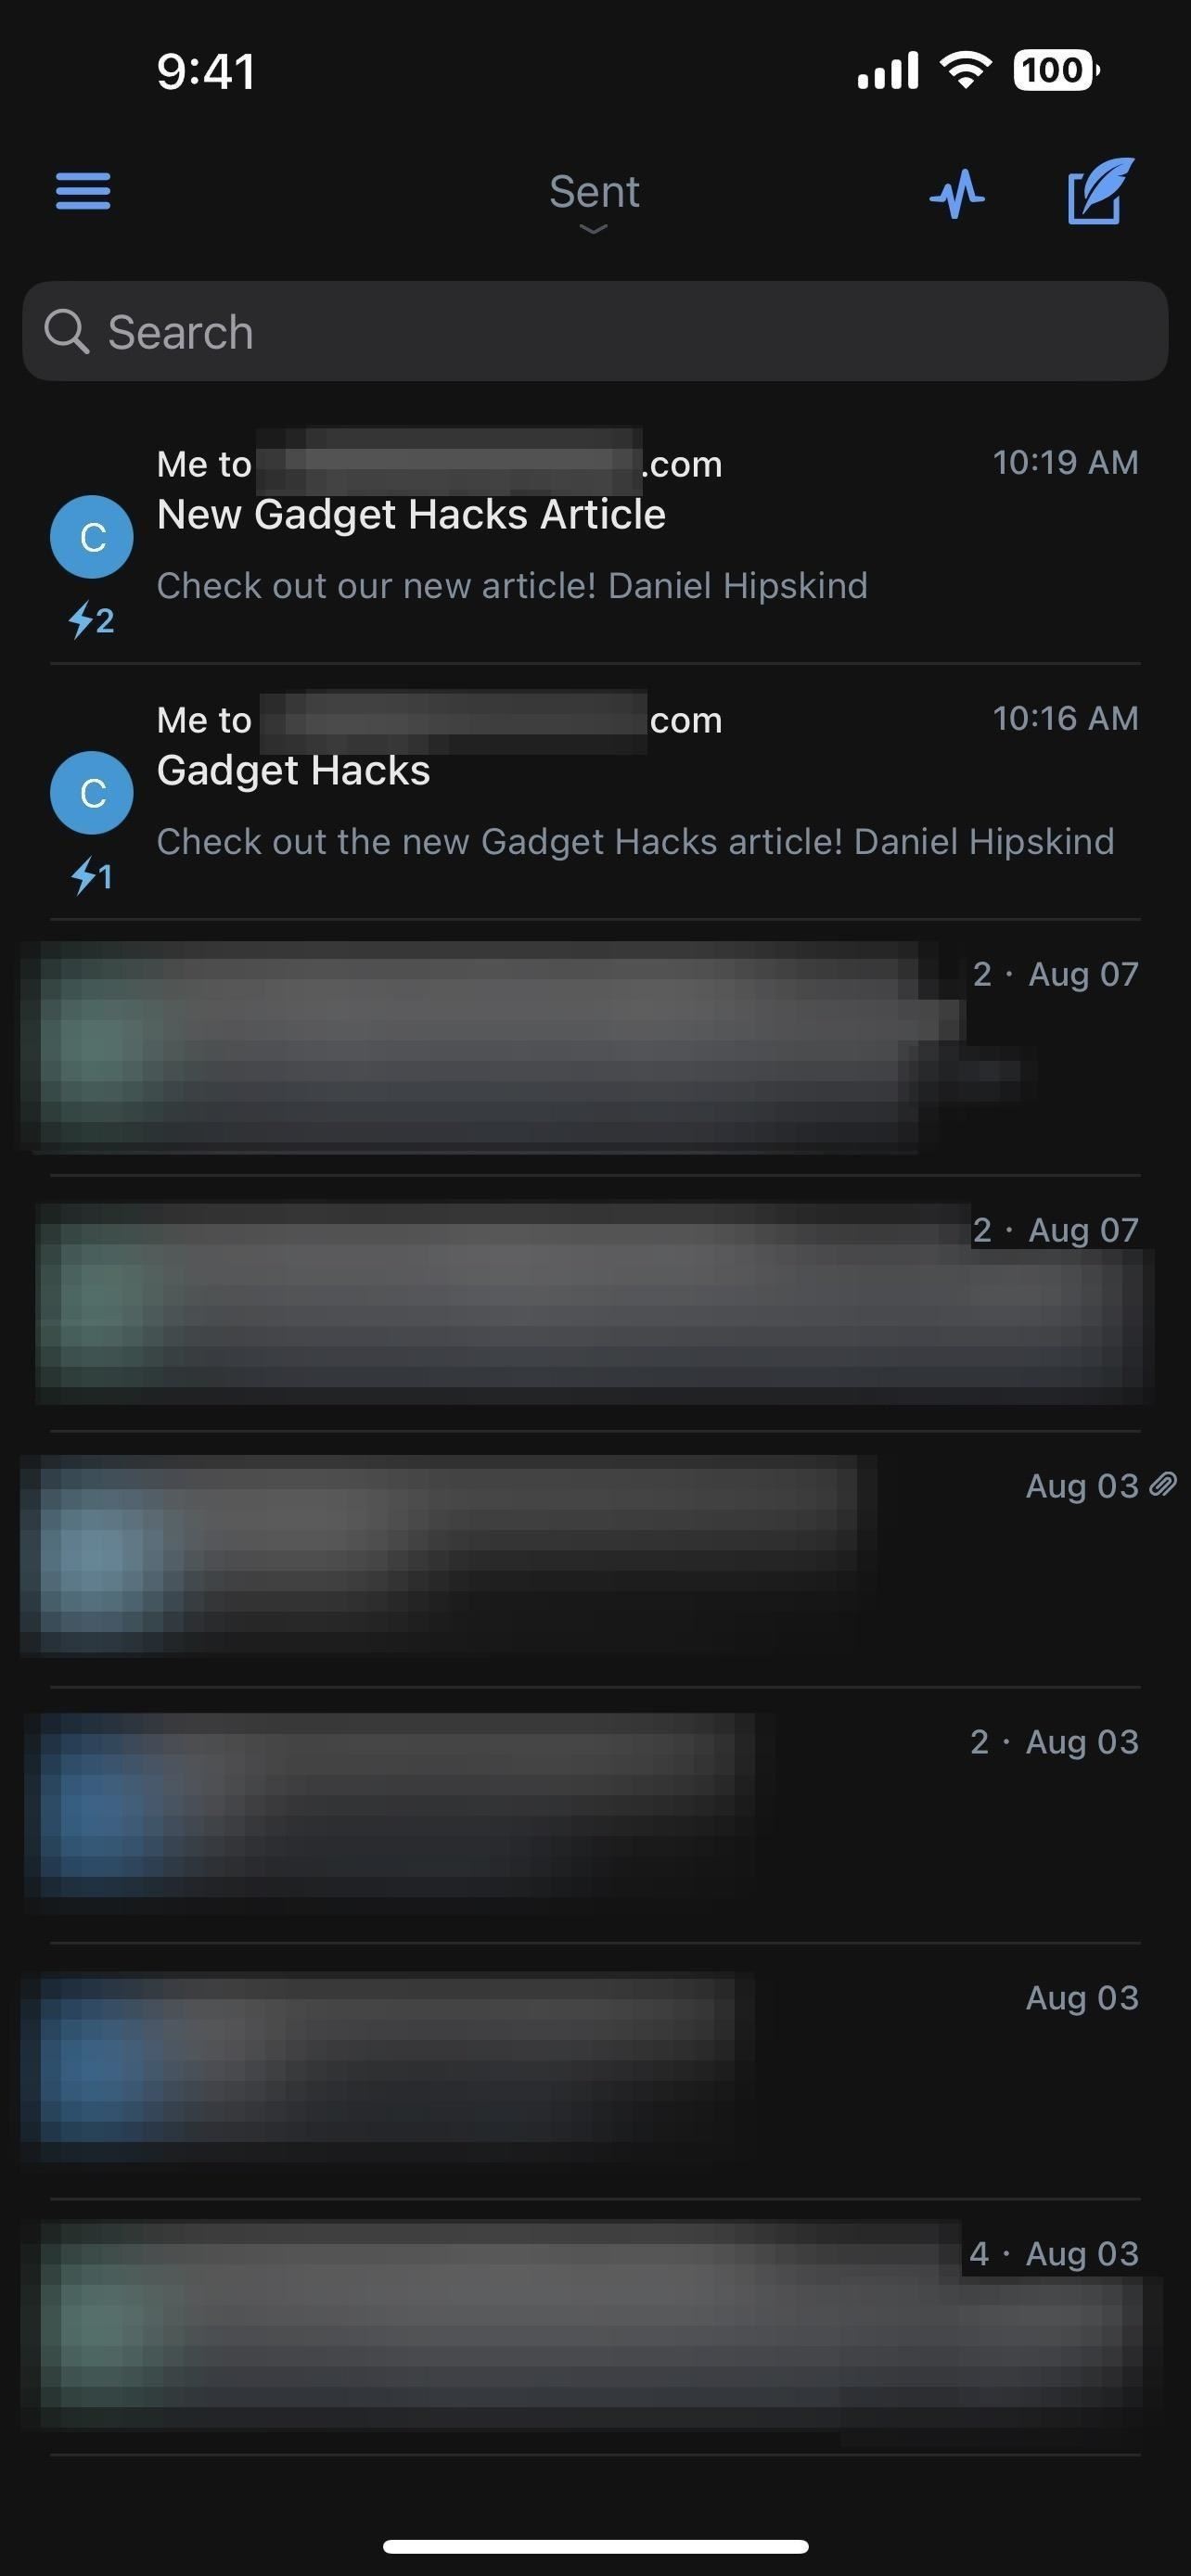 How to Tell When Someone Opens the Emails You Send Them (Using Hidden Trackers or Read Receipt Requests)